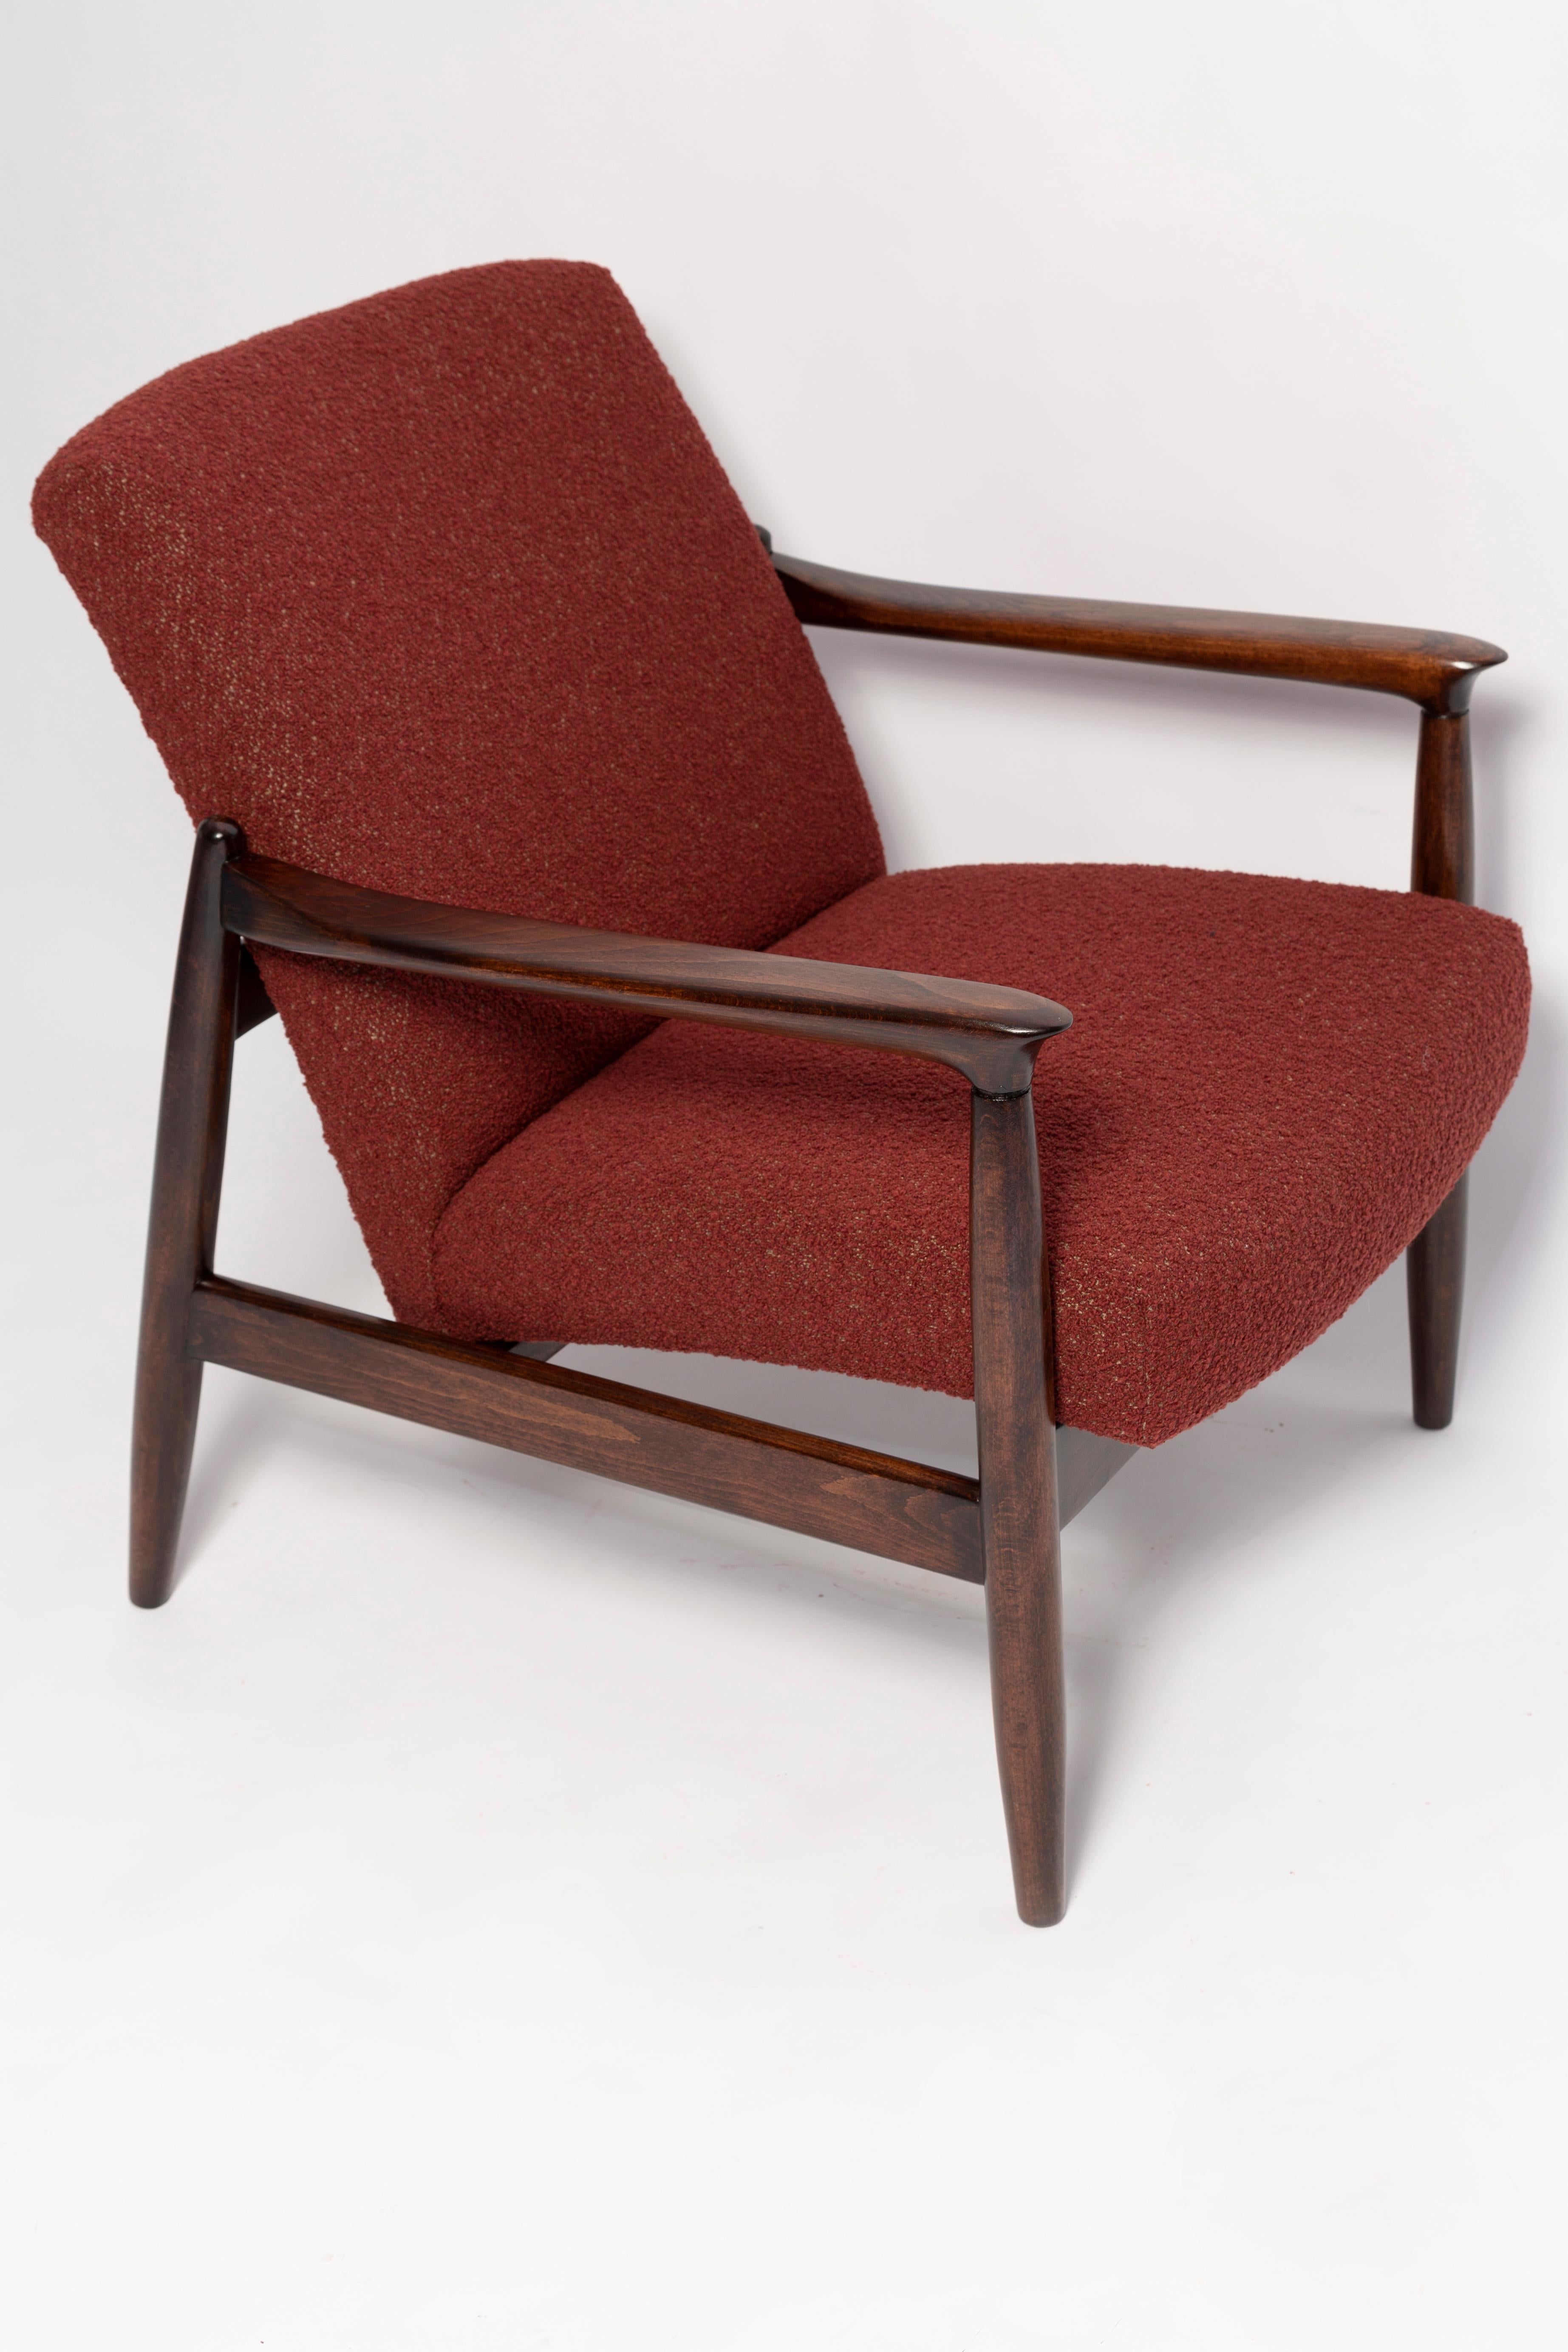 Two Mid Century Burgundy Boucle GFM-64 Armchairs, Edmund Homa, Europe, 1960s In Excellent Condition For Sale In 05-080 Hornowek, PL